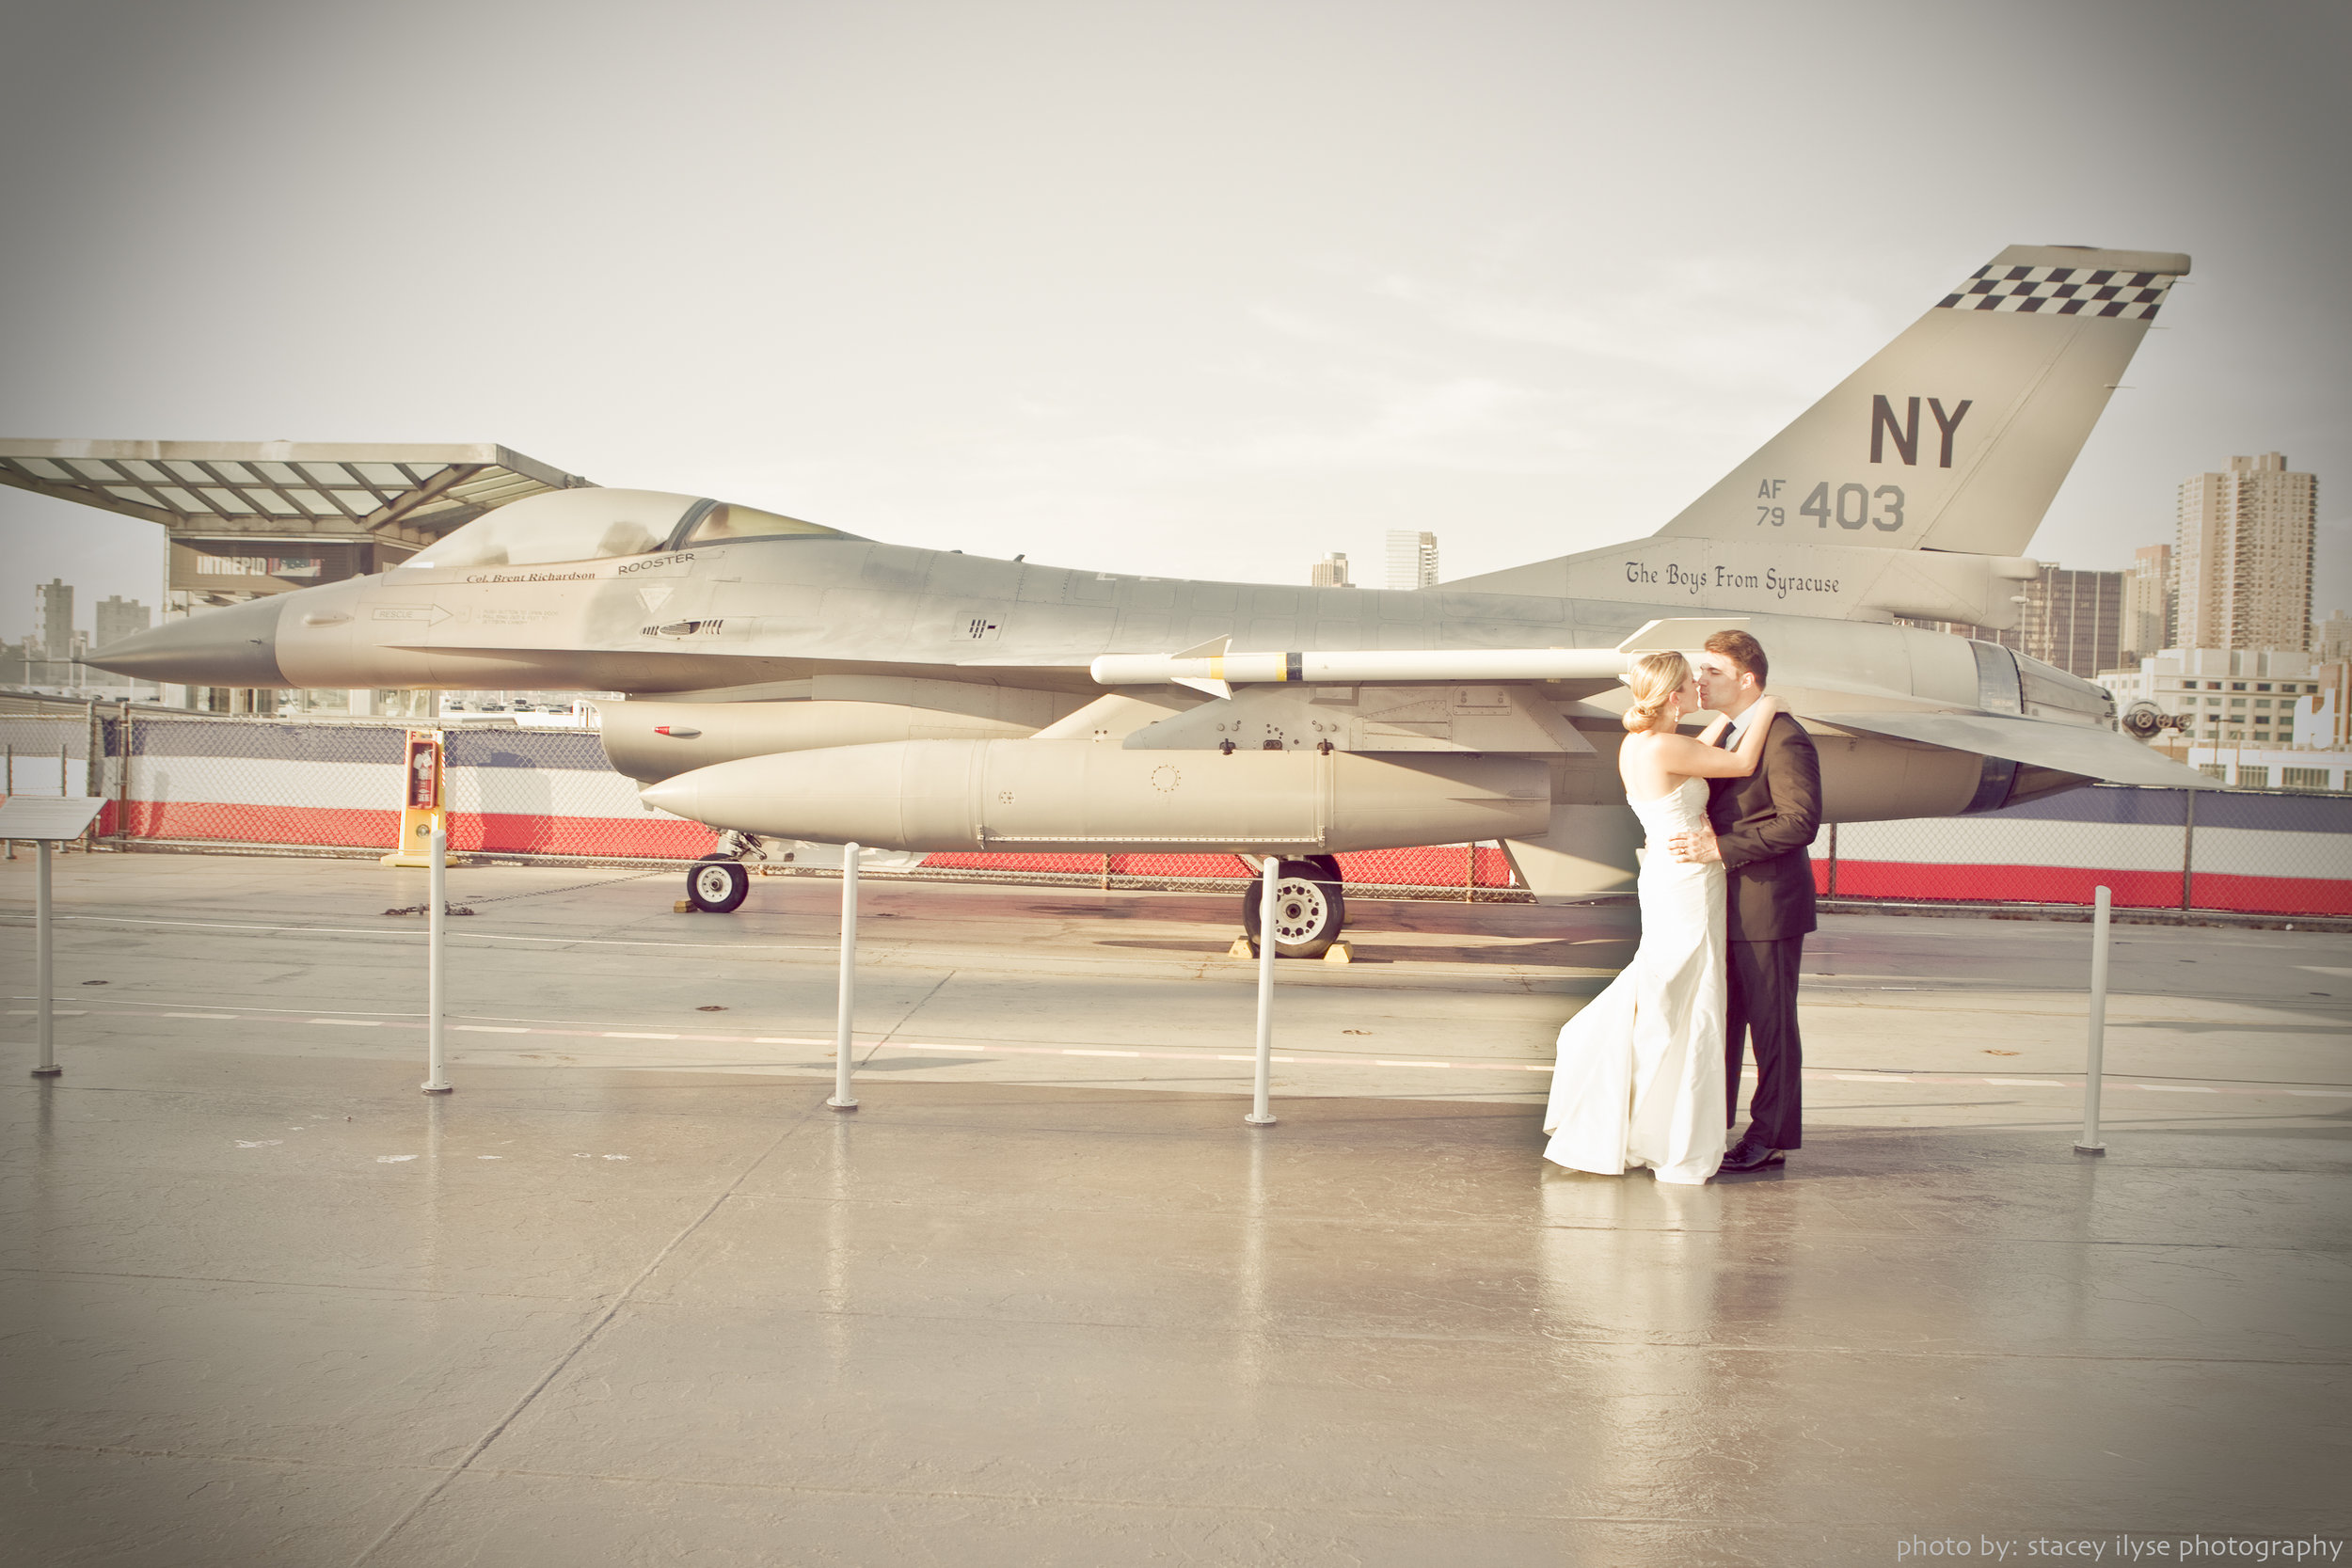 Couple on Flight Deck - Stacey Illyse Photography (1).jpg